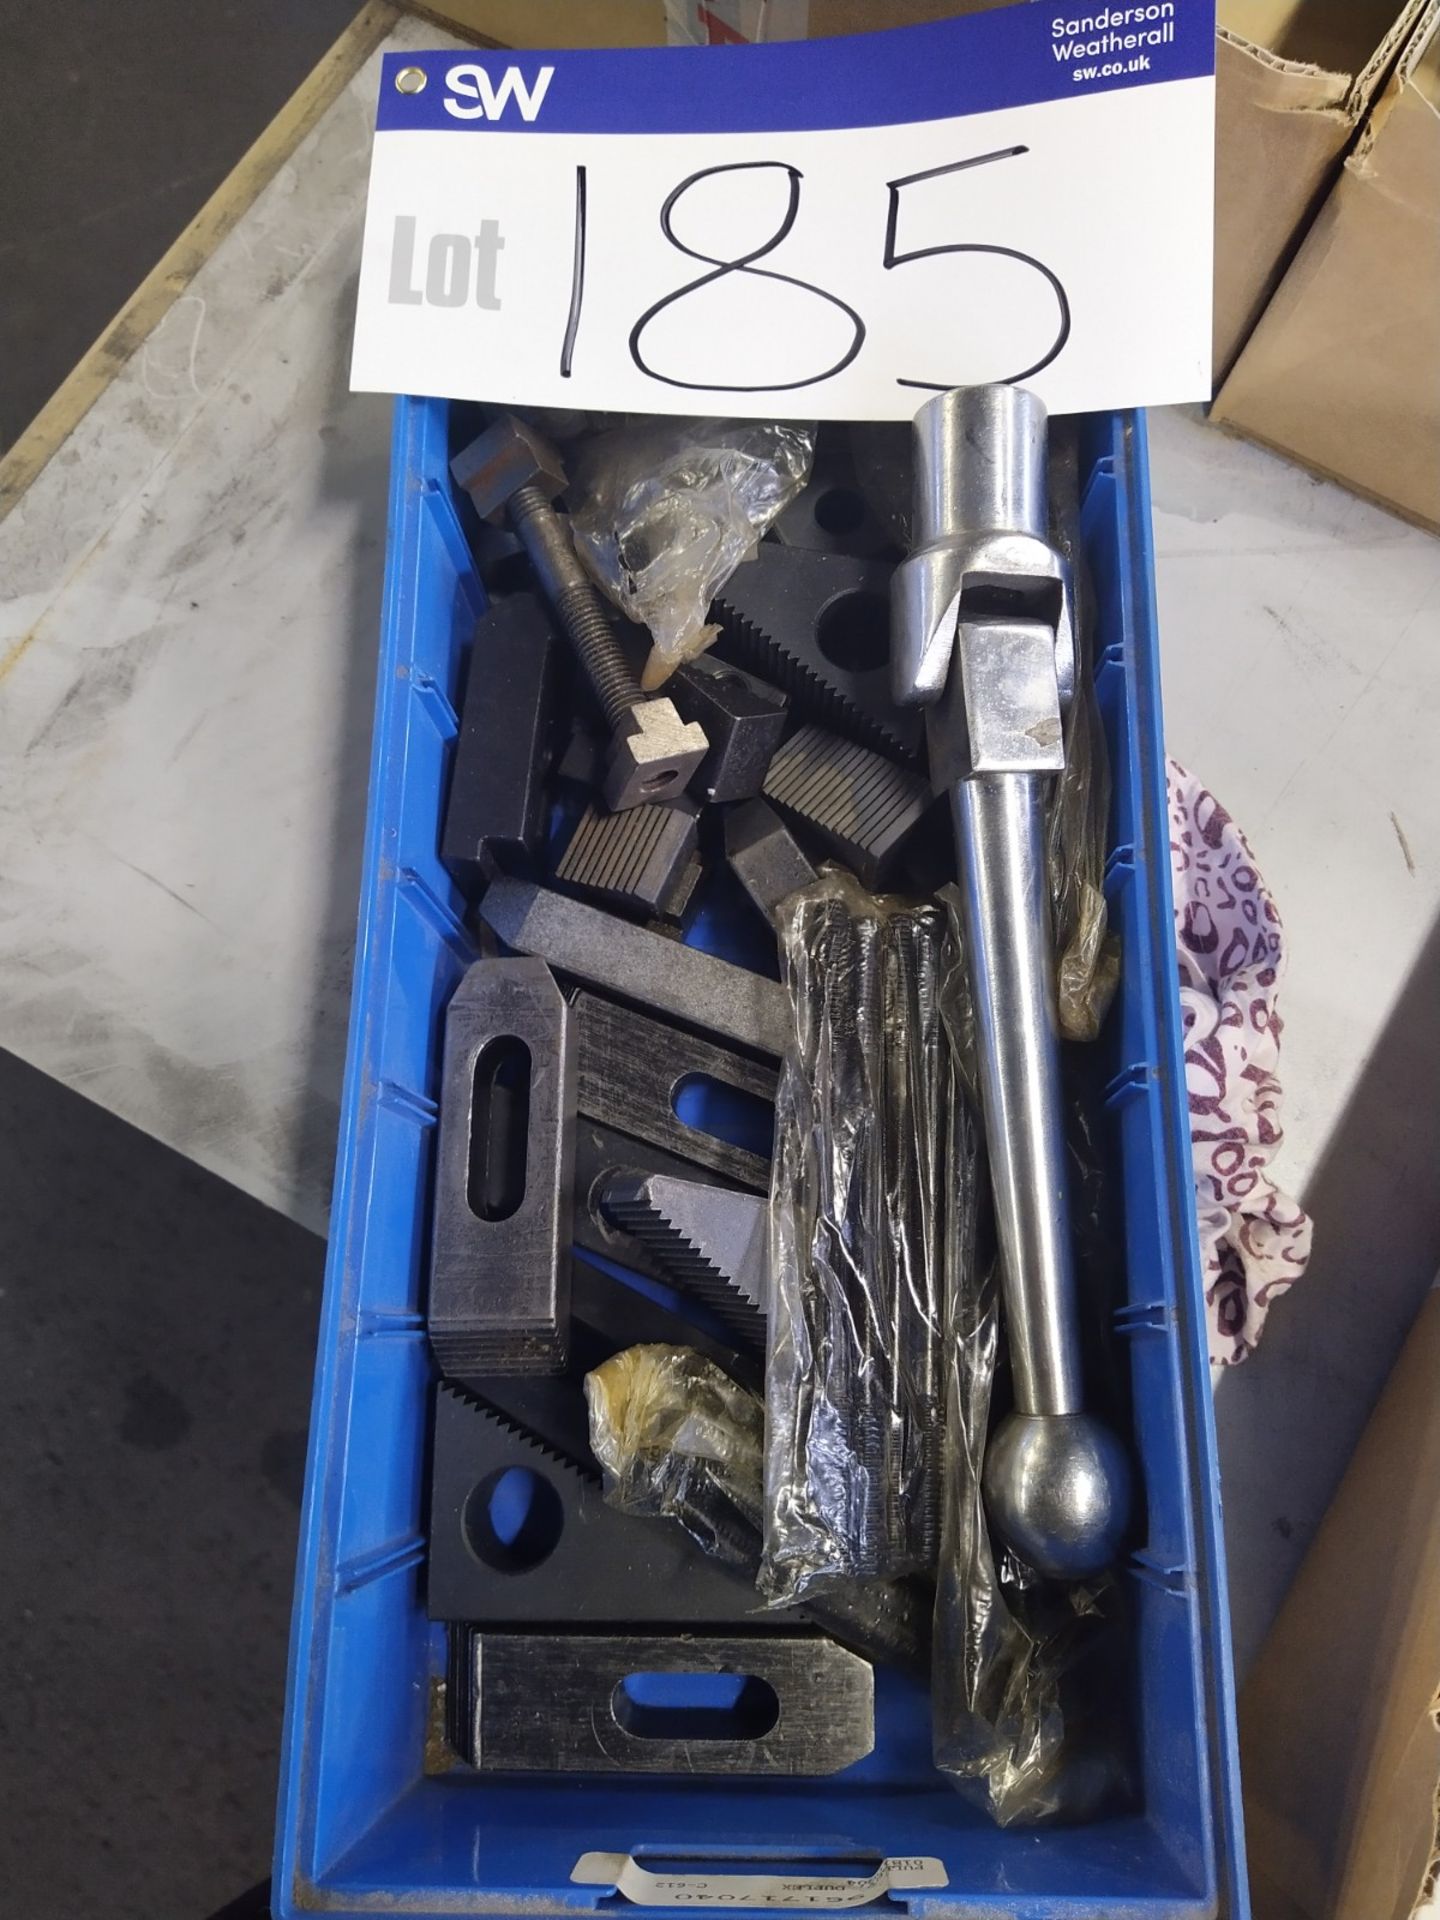 Three boxes of workpiece holding clamps, free loading onto purchasers transport - yes, item - Image 3 of 3